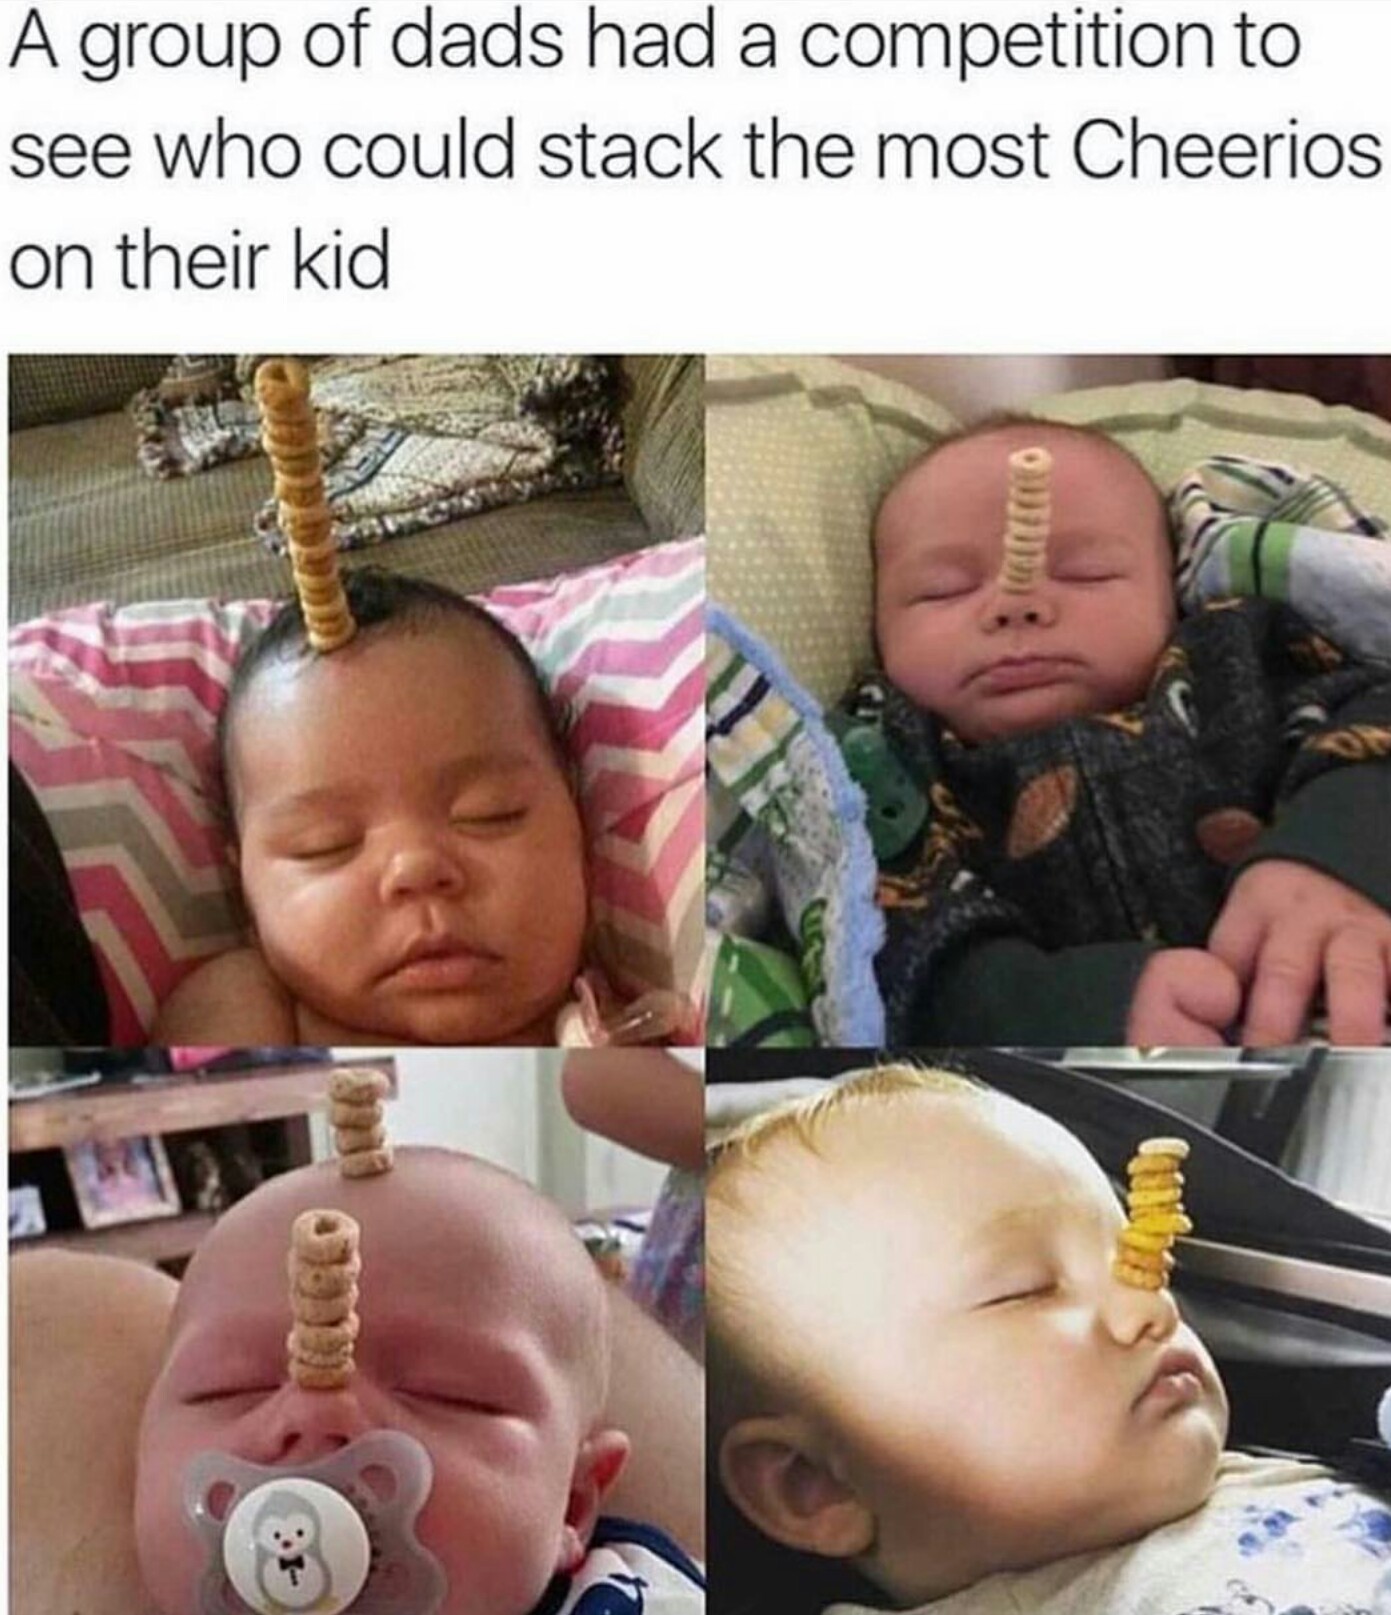 What if we stack babies on cheerios? - meme